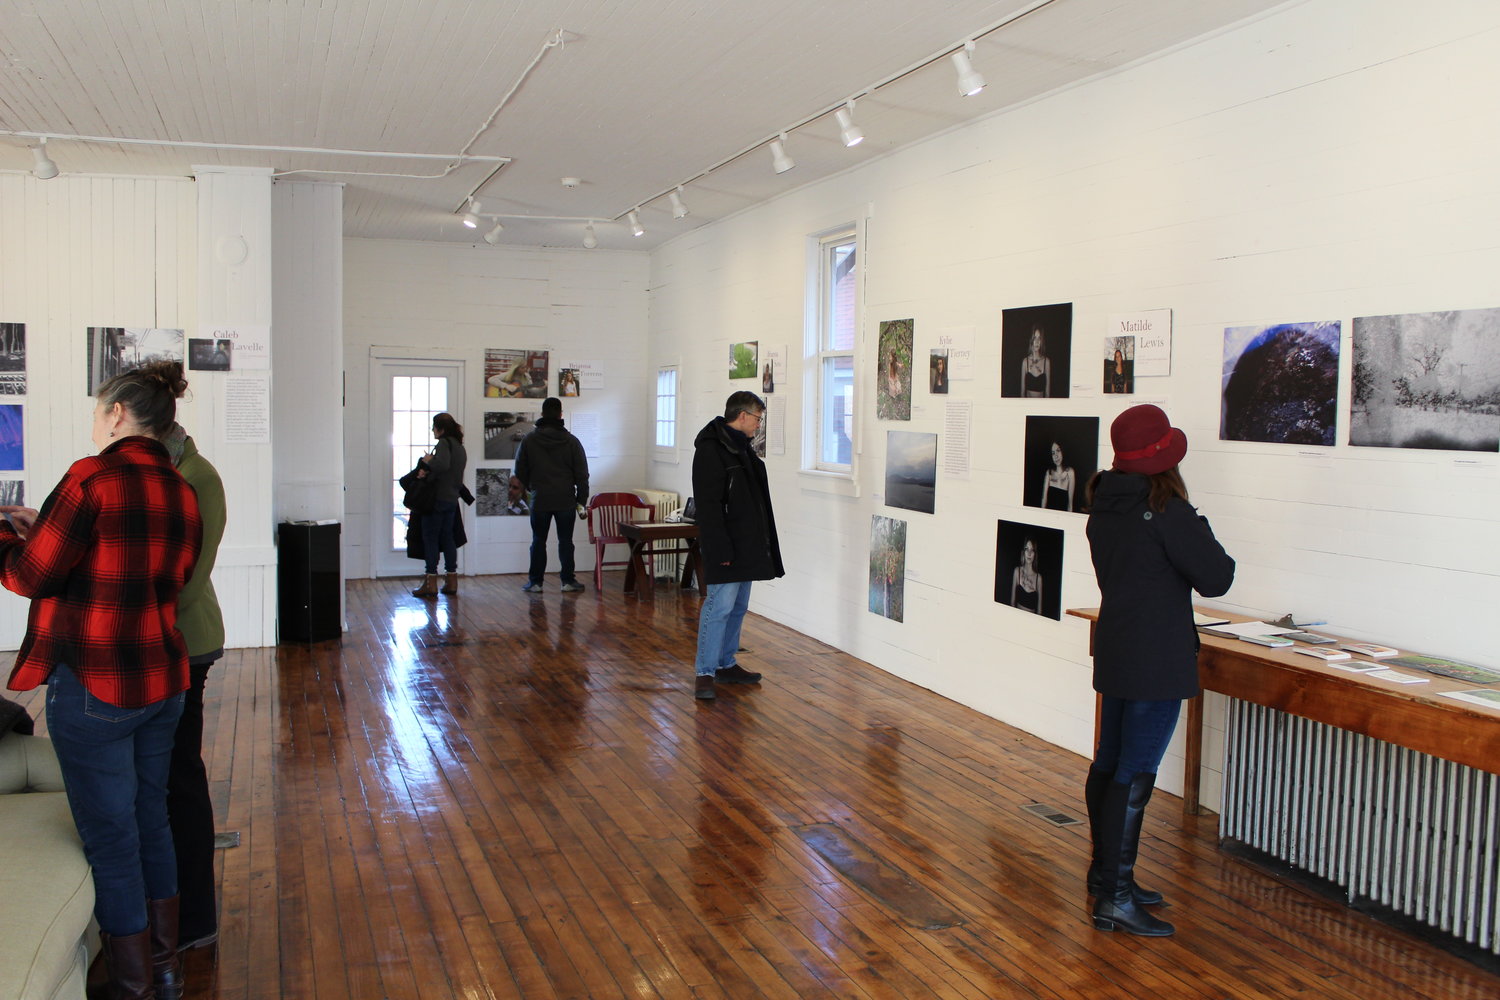 Hurleyville’s Gallery 222 is showing work from Project: Identity, a program for area teens that immersed them in digital photography and taught them how to create an exhibition, said gallery coordinator Ellyane Hutchinson. “We believe the arts are critical to the strength of a community,” she said. Here, visitors admire the students’ work. There are a myriad of small galleries and studios open to the public. Something is always happening at the Delaware Valley Arts Alliance in Narrowsburg, the Catskill Arts Society in Livingston Manor, the Cooperage in Honesdale, the Art Factory in White Mills and the Everhart Museum in Scranton. Check www.sullivancatskills.com or the www.waynecountyartsalliance.org for more information.